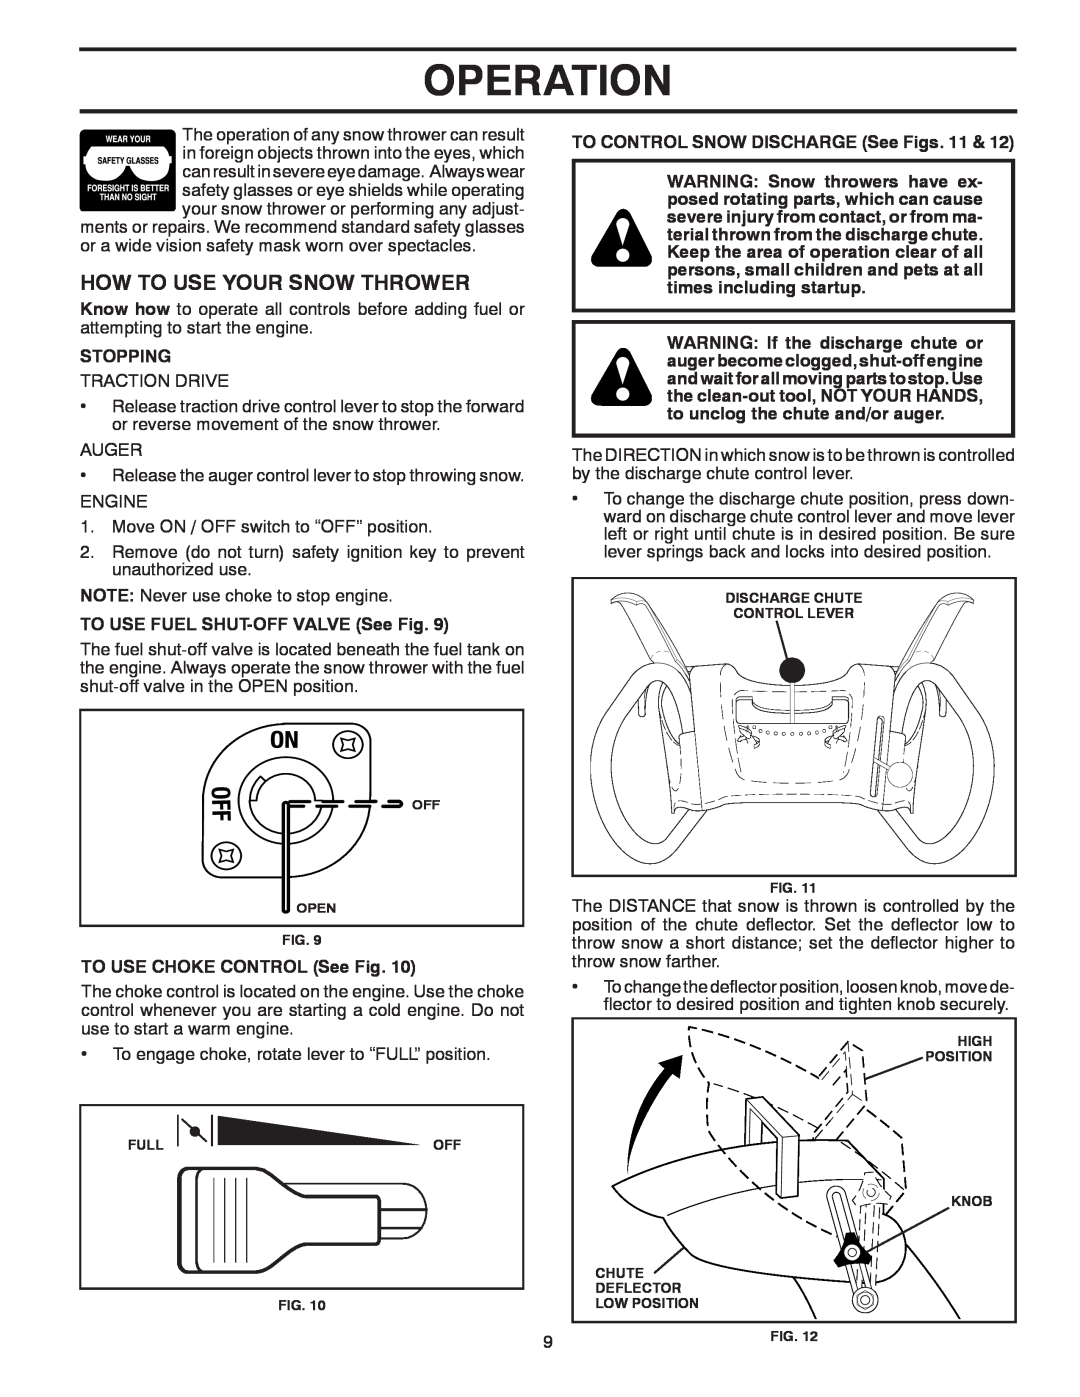 Poulan 421602 owner manual How To Use Your Snow Thrower, Operation, Stopping, TO USE FUEL SHUT-OFF VALVE See Fig 